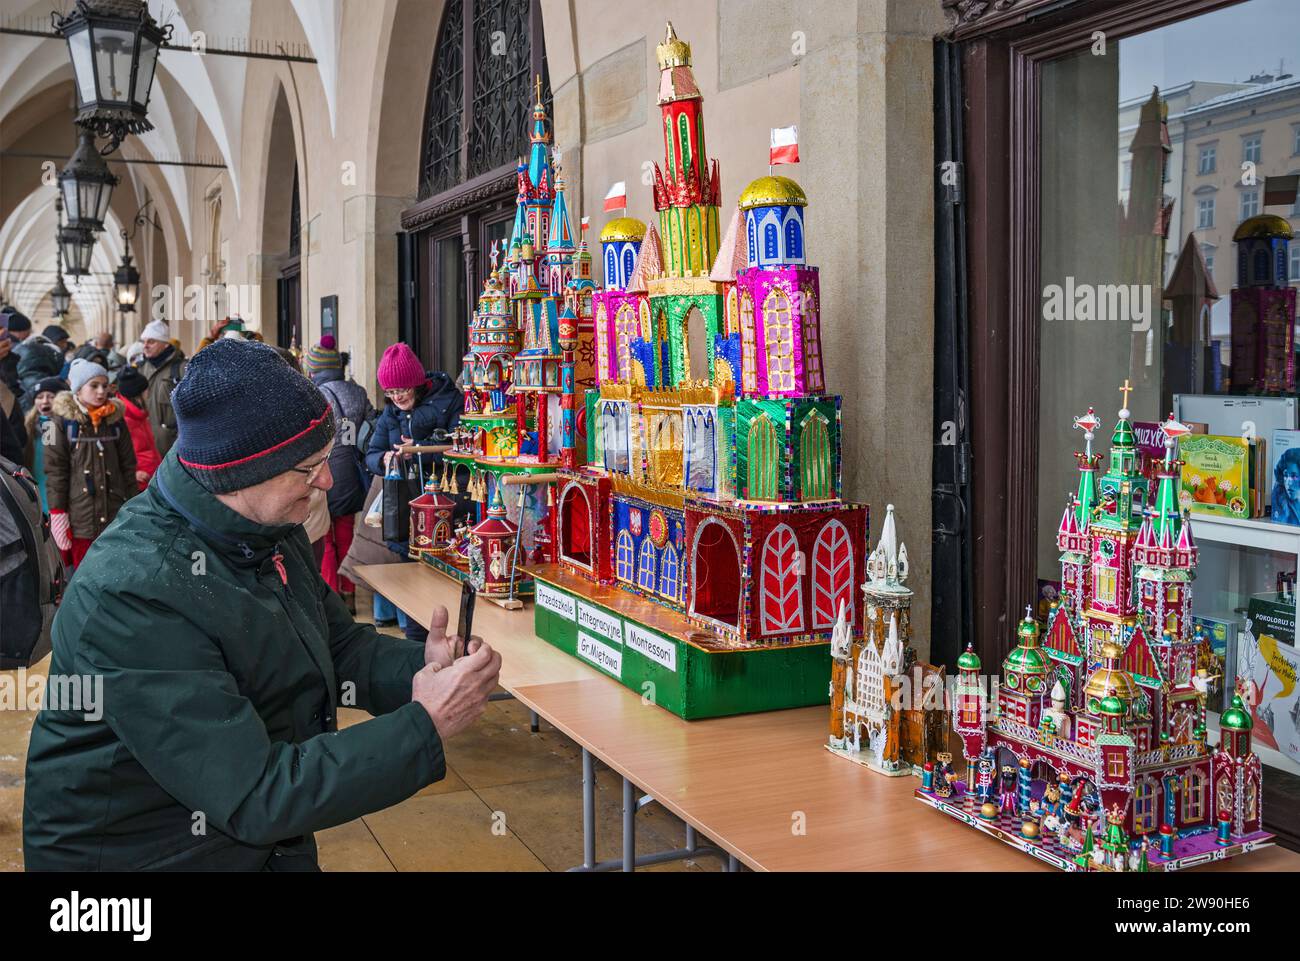 People taking photos of Szopki (Christmas Nativity scenes) at opening of annual contest in December, event included in UNESCO Cultural Heritage list, at arcades of Sukiennice (Cloth Hall), Main Market Square, Kraków, Poland Stock Photo